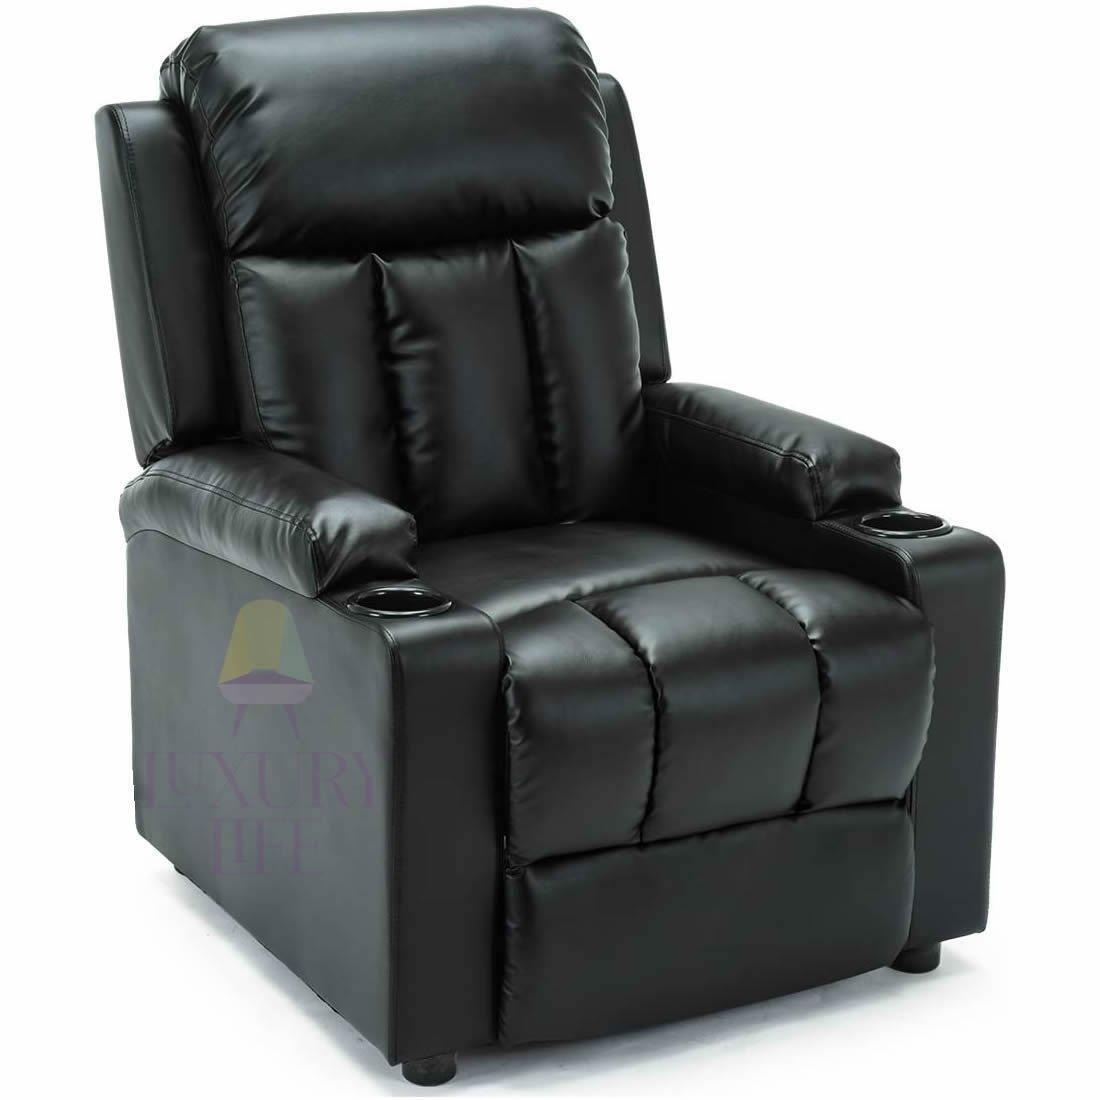 Stockholm Leather Armchair Manual Push Back Recliner - image 1